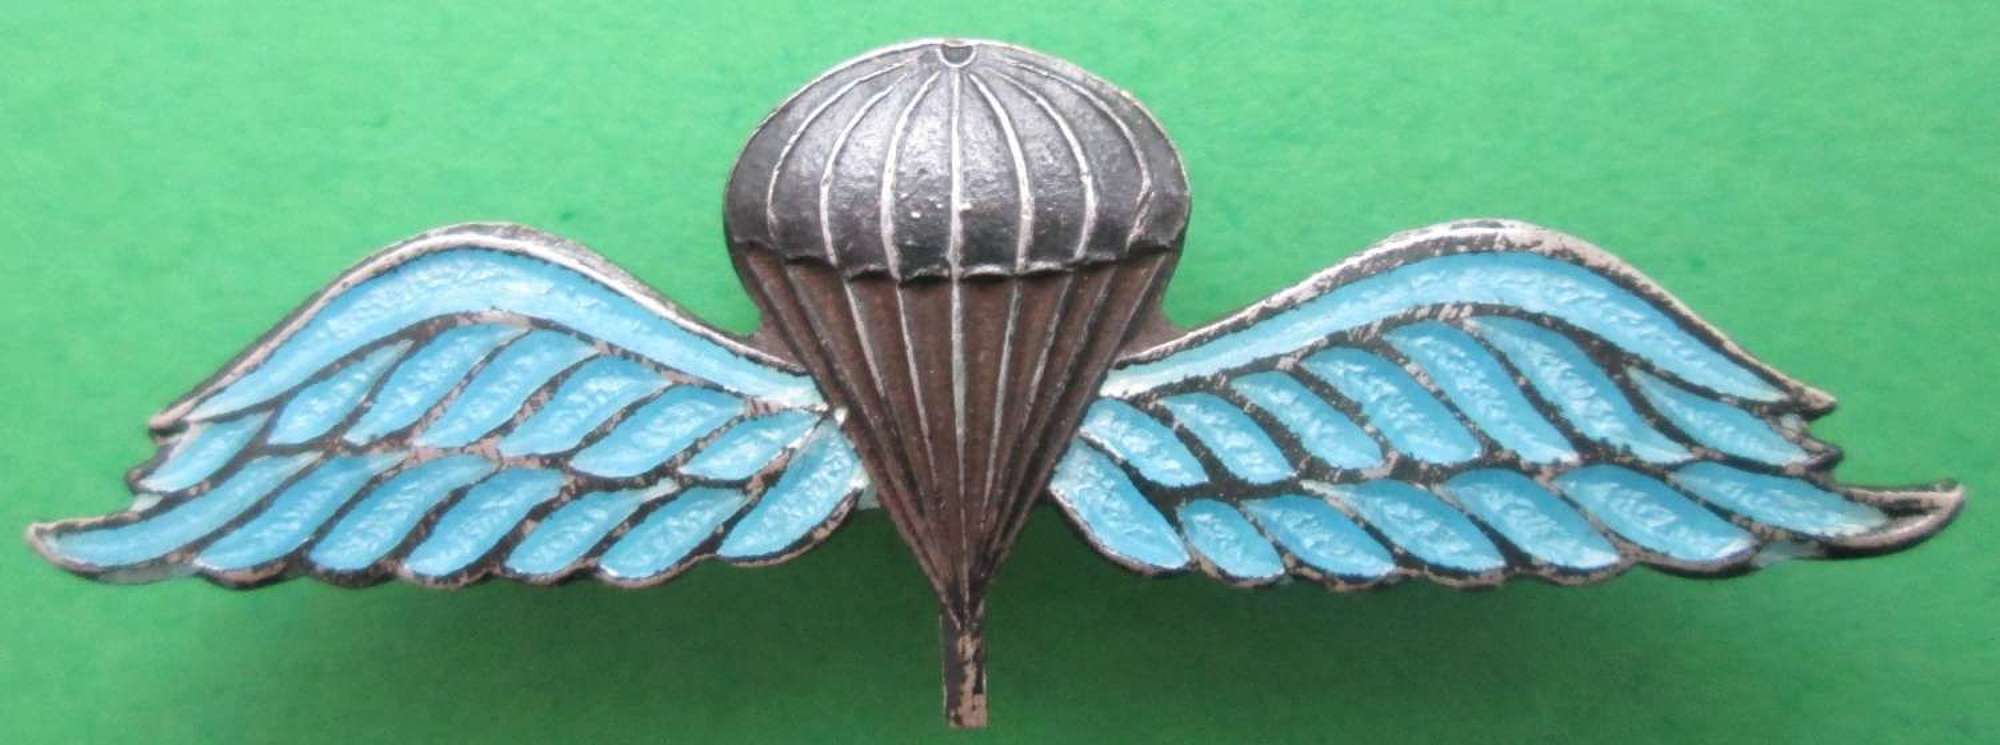 A WWII PERIOD SILVER PARACHUTE QUALIFICATION BADGE